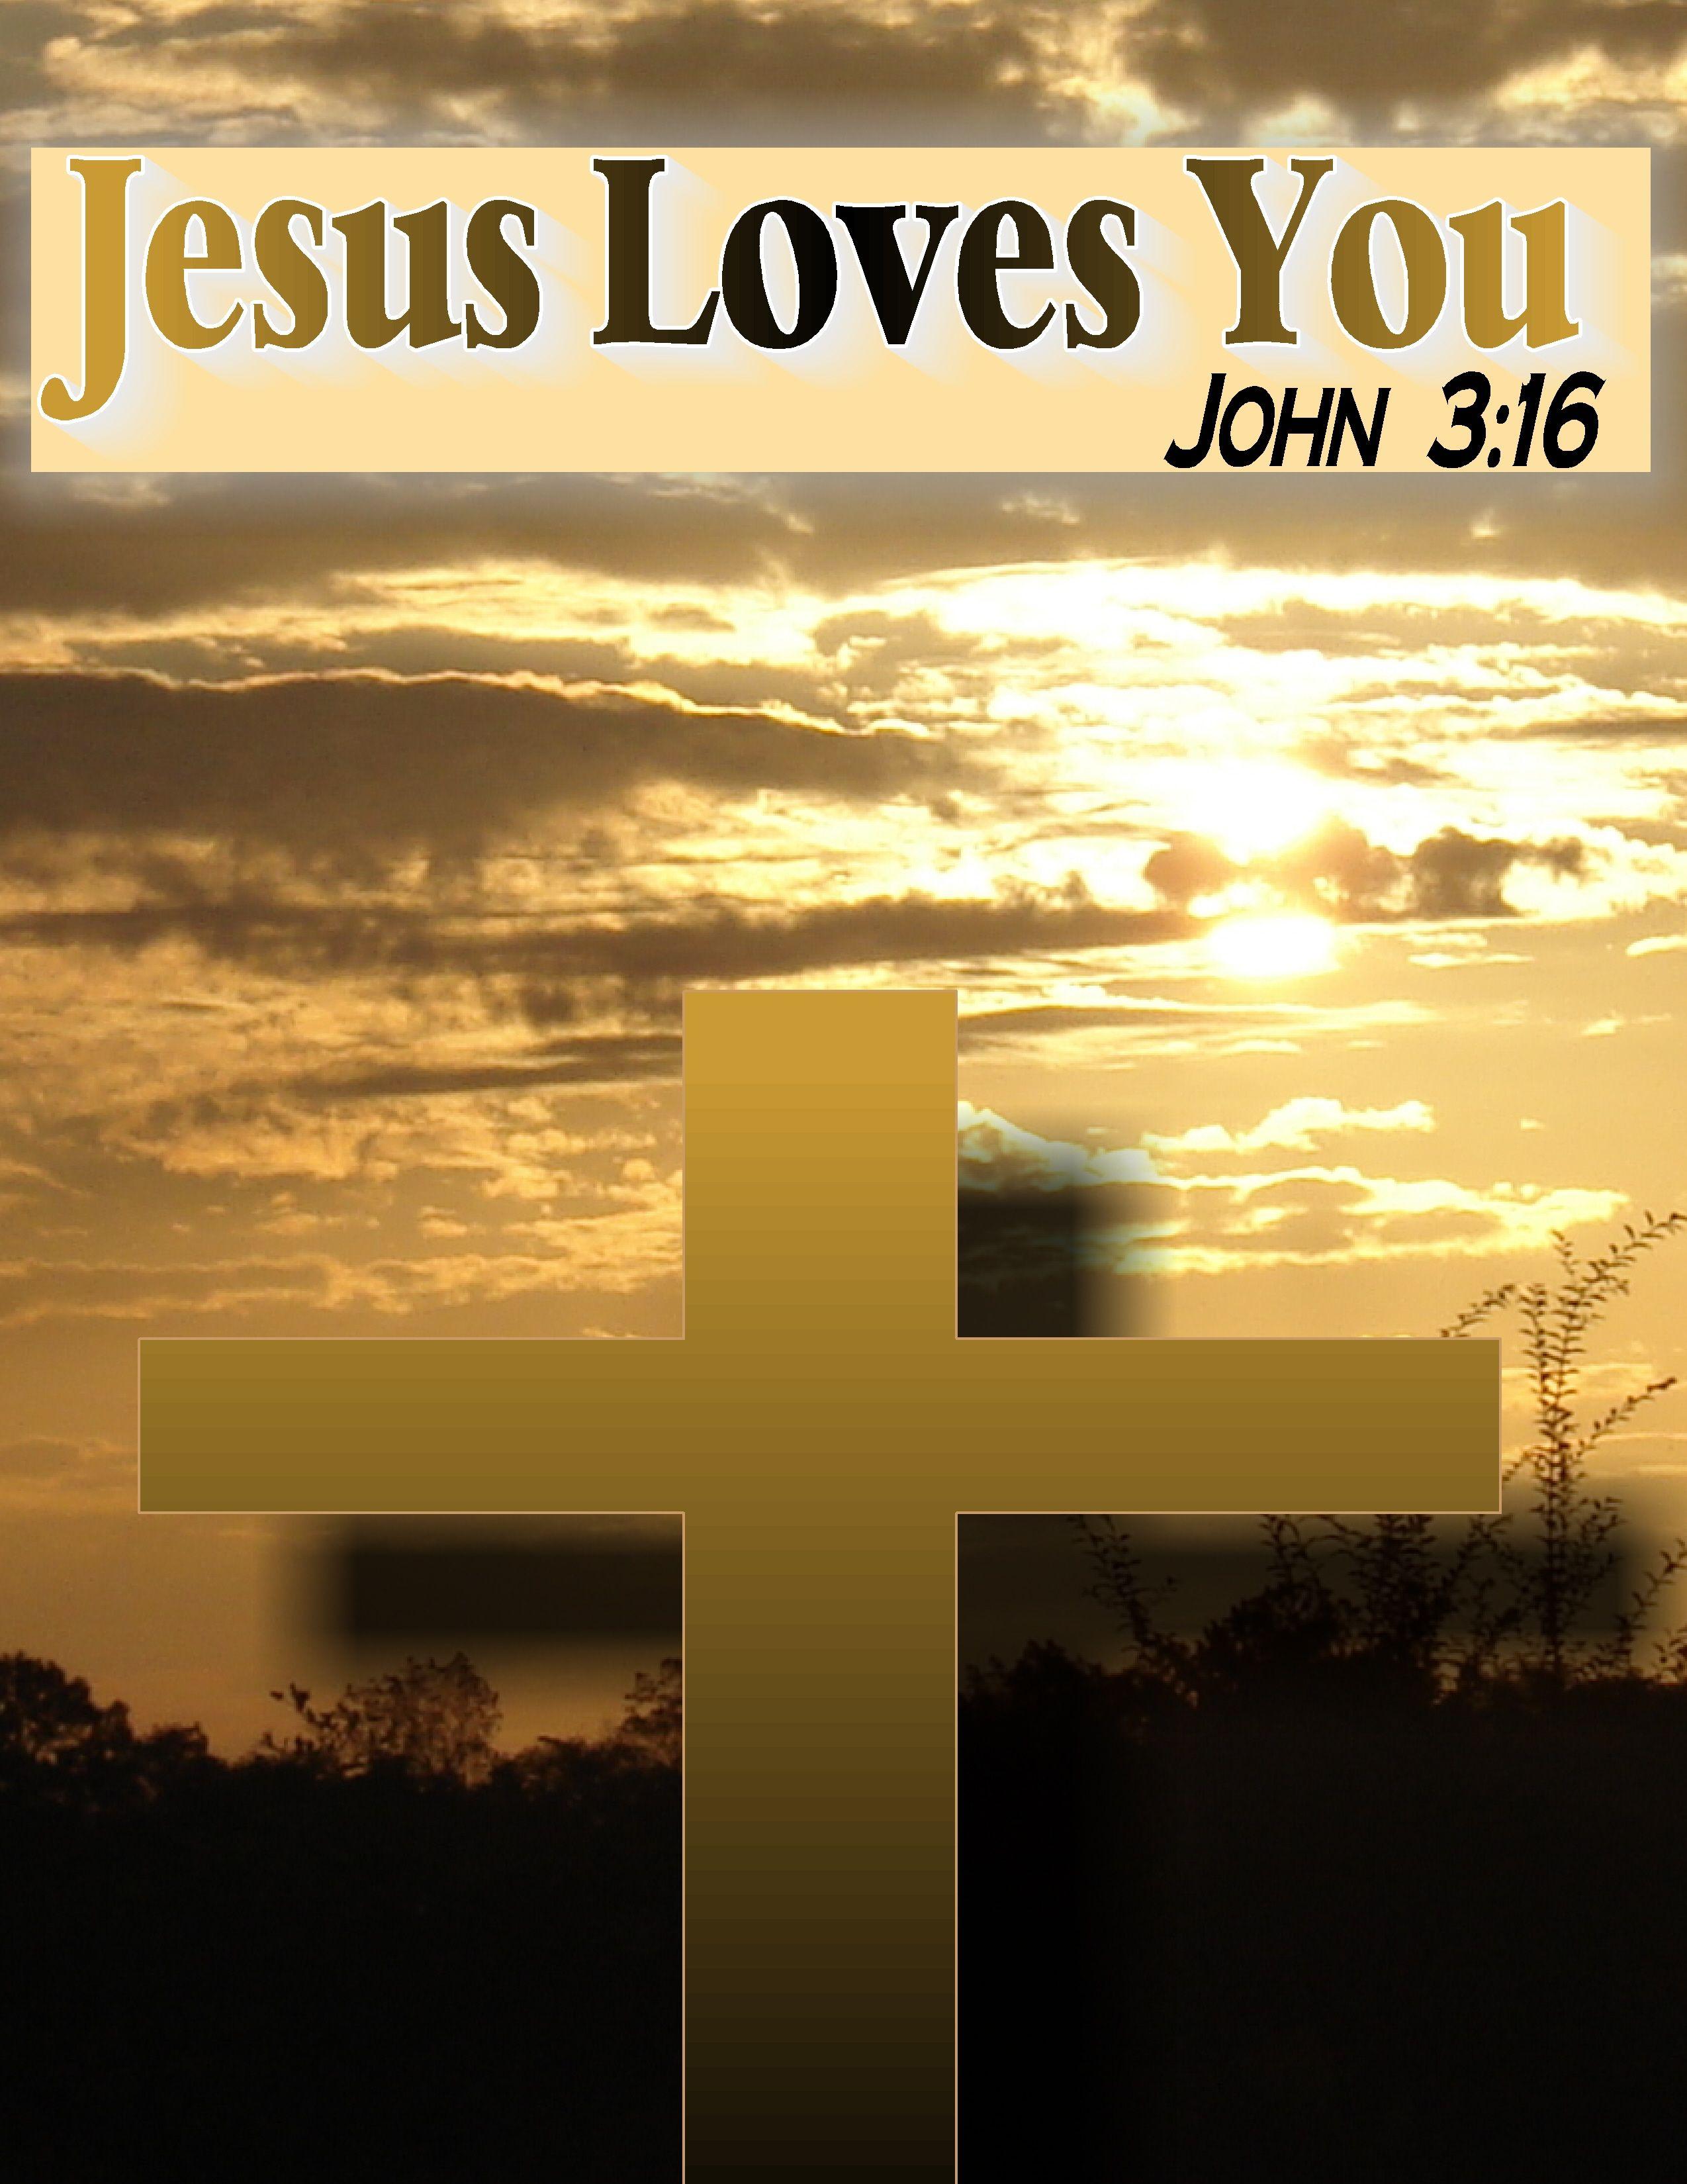 Jesus Loves You Quotes Life Quotes